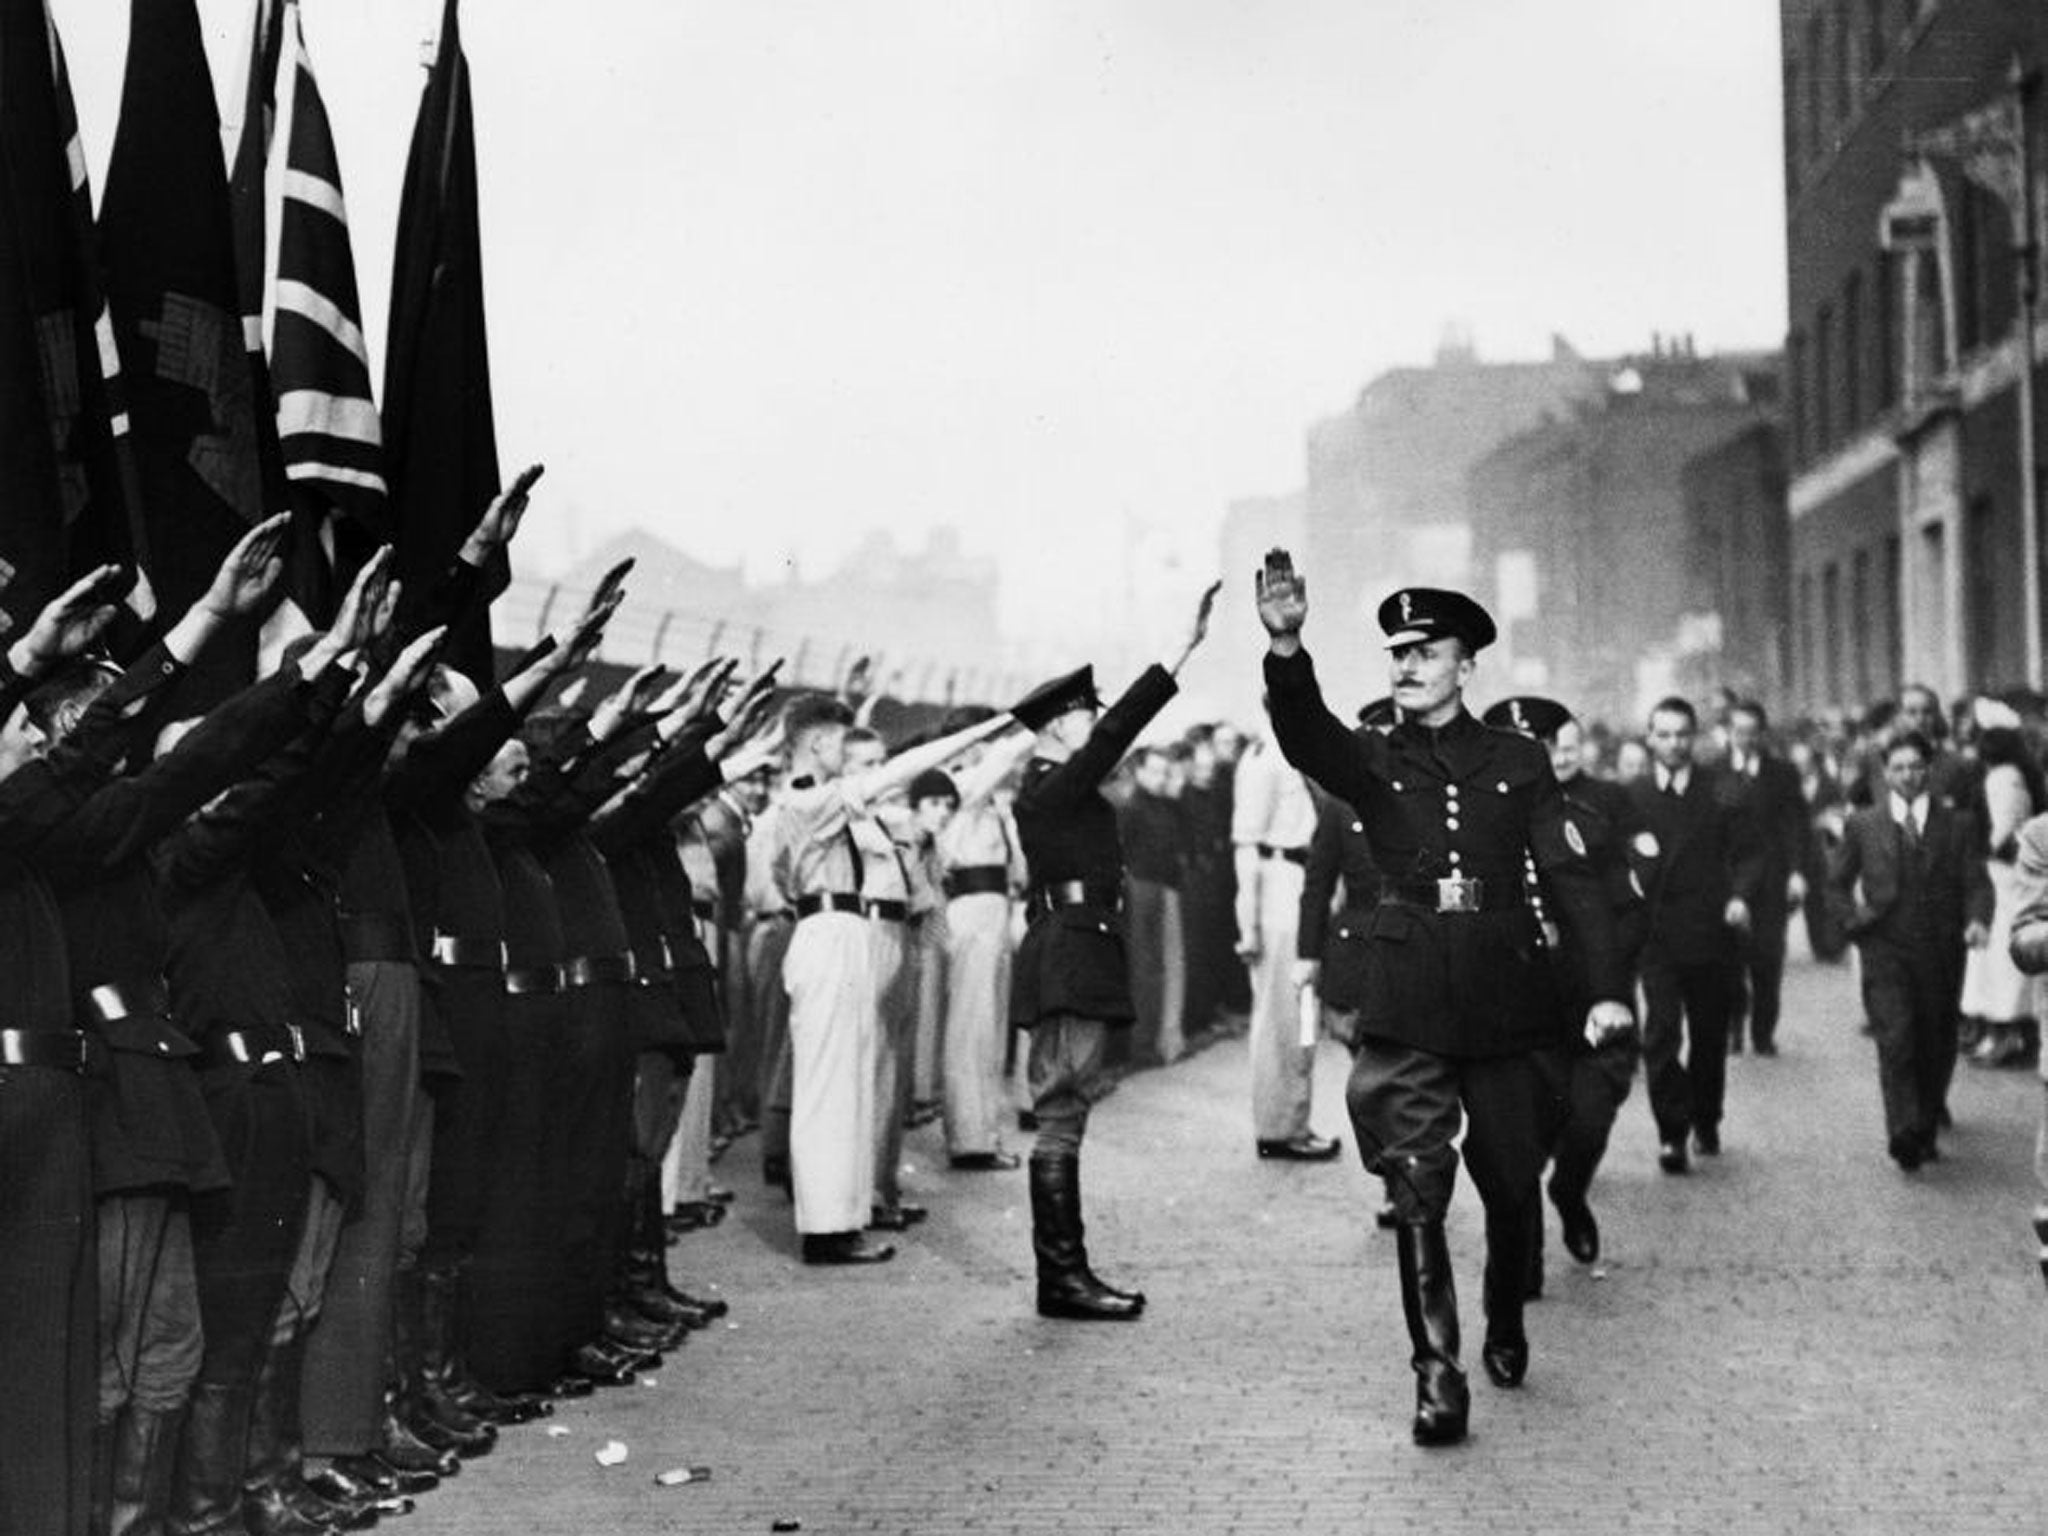 Right march: Sir Oswald Mosley’s British Union of Fascists recruited from the working classes